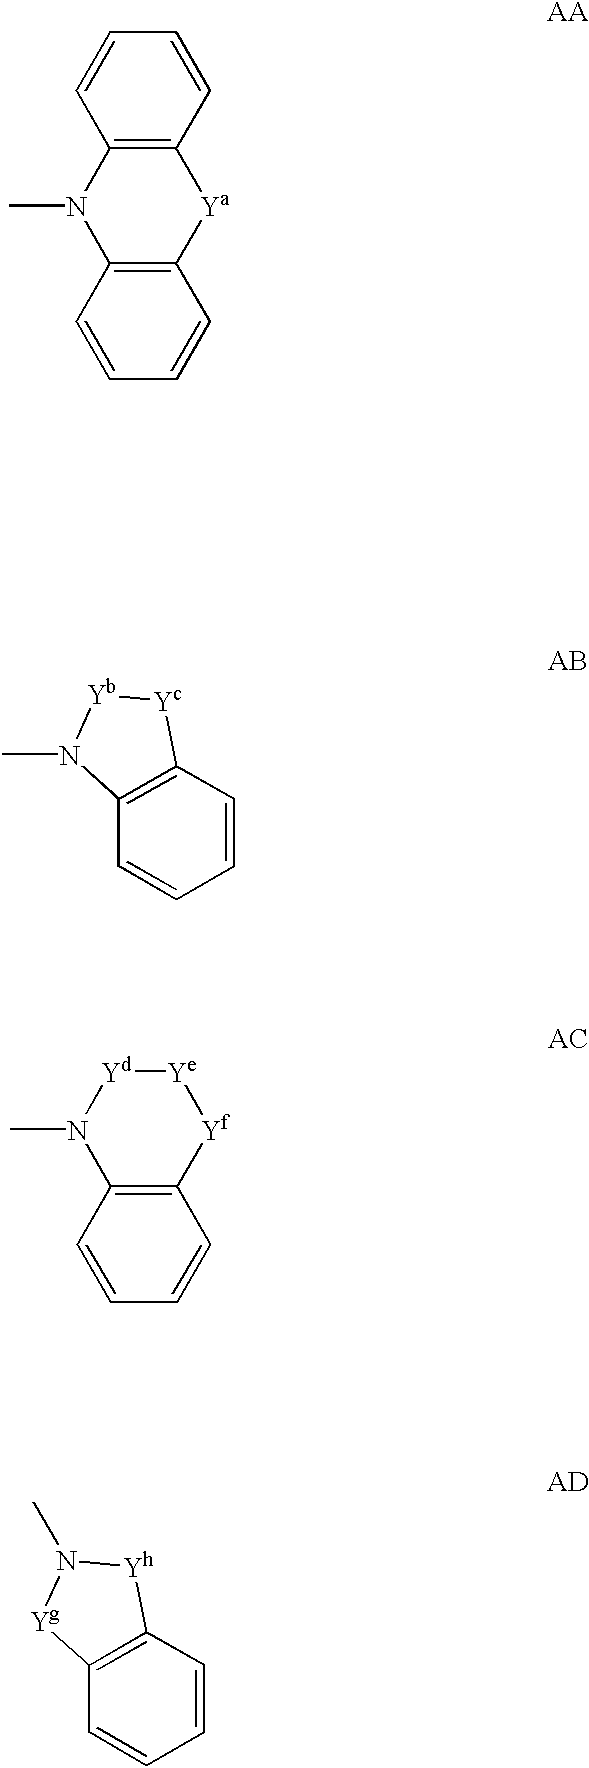 Spiropiperidine compounds as ligands for ORL-1receptor